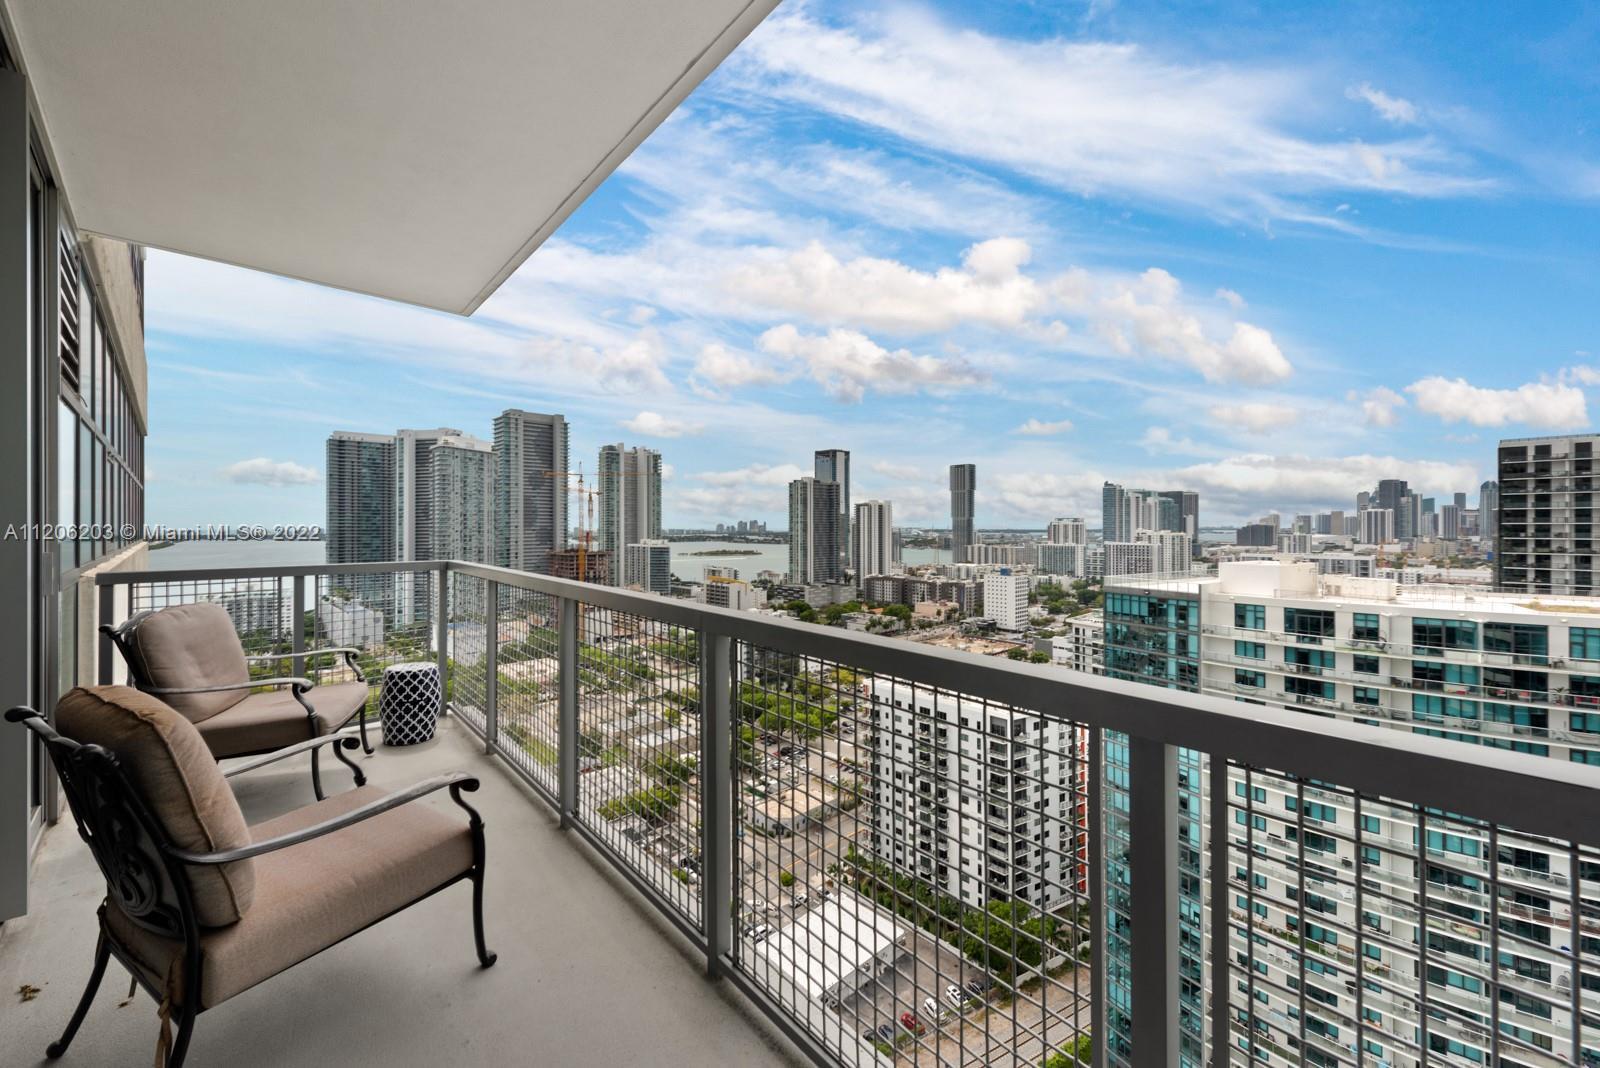 A Floor-to-ceiling 2 Bedrooms + 2 Full Bathrooms condo in the heart of Midtown, an urban design that